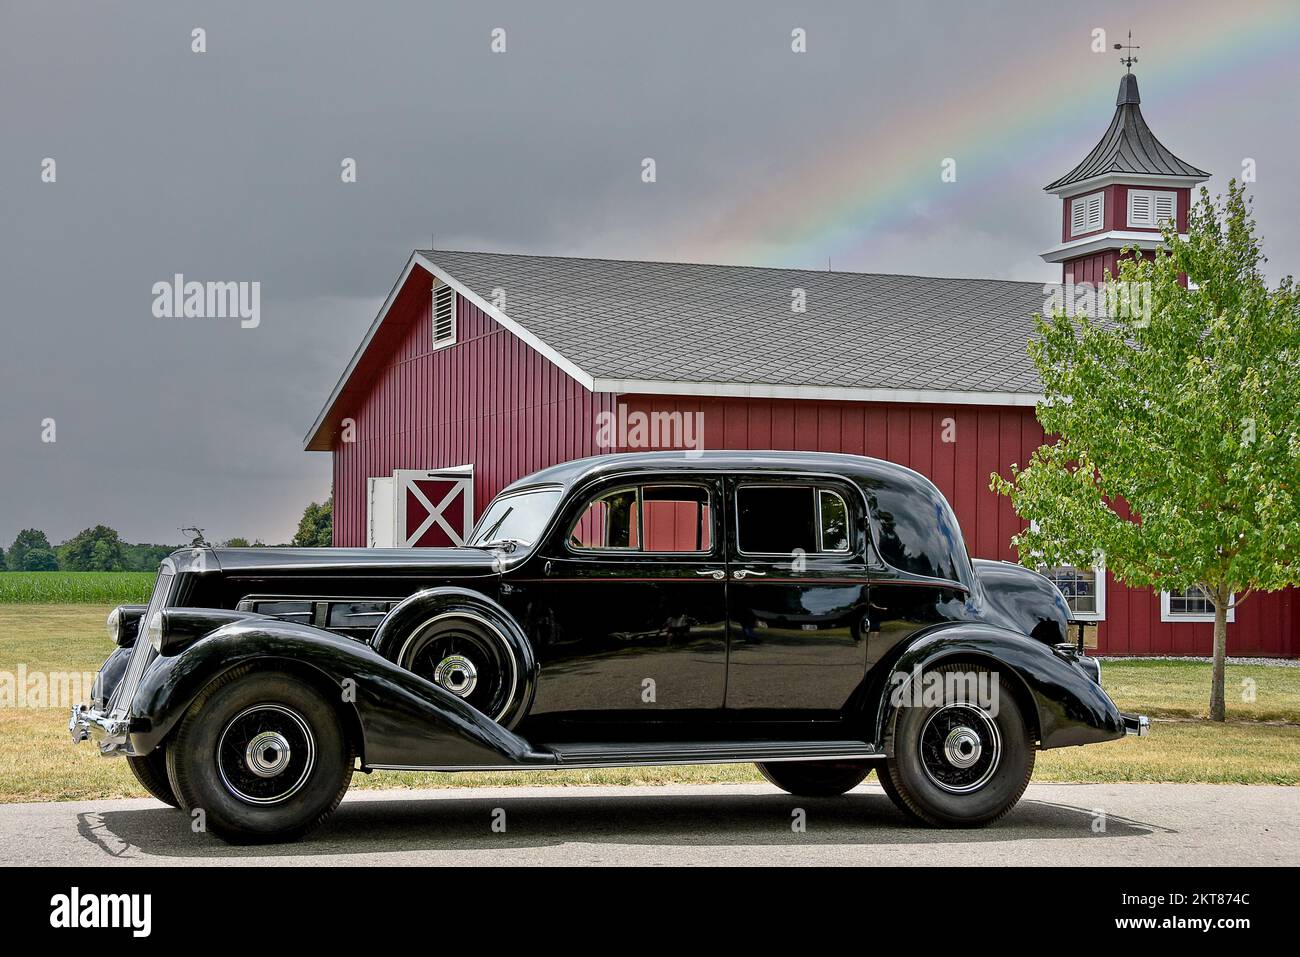 Vintage black automobile by a red farm barn with rainbow Stock Photo